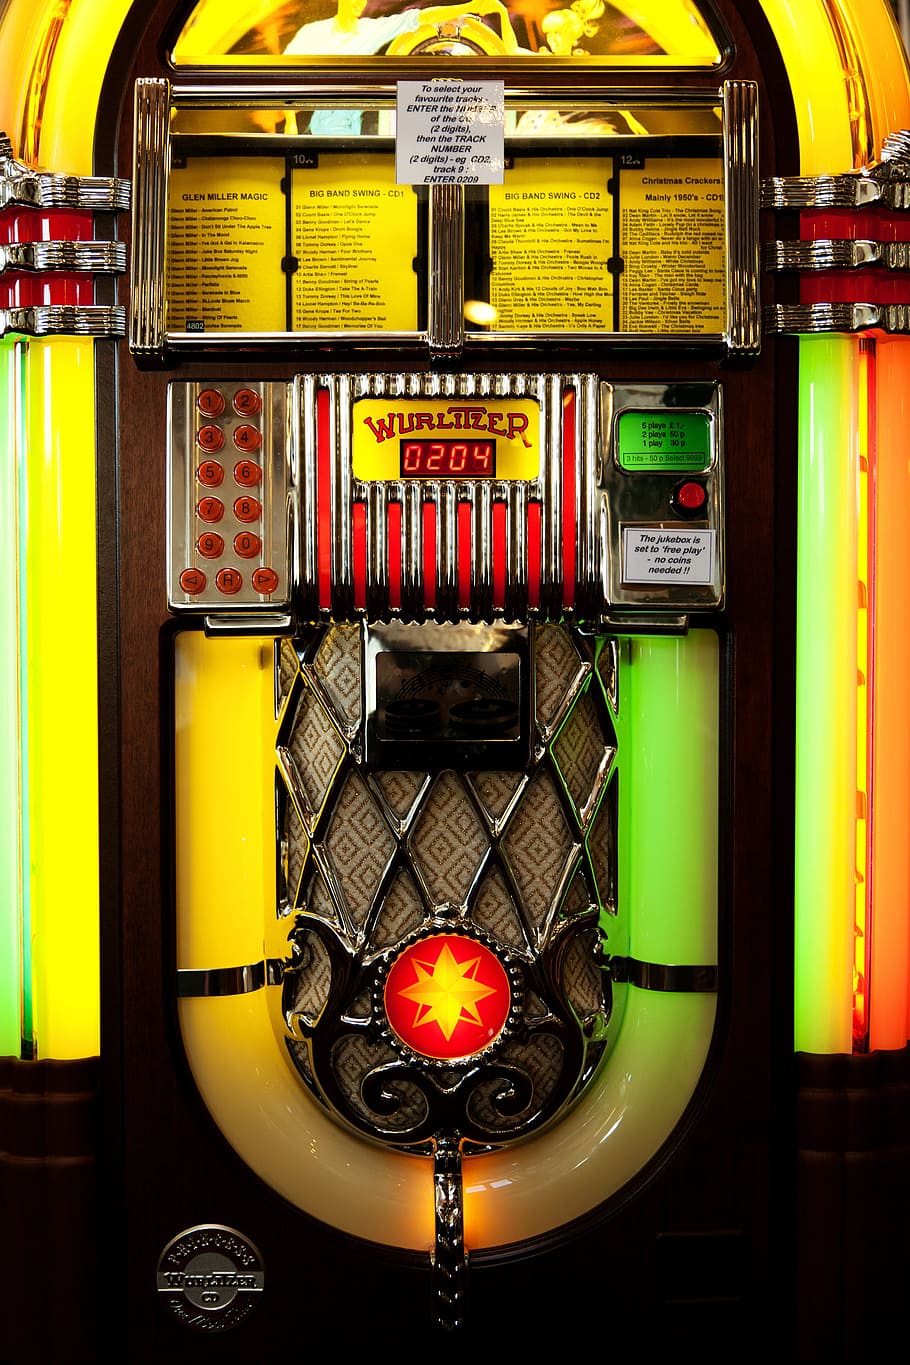 wurltieer jukebox, 0204, Antique, Box, Collectible, Electronic, historical, history, hits, jukebox